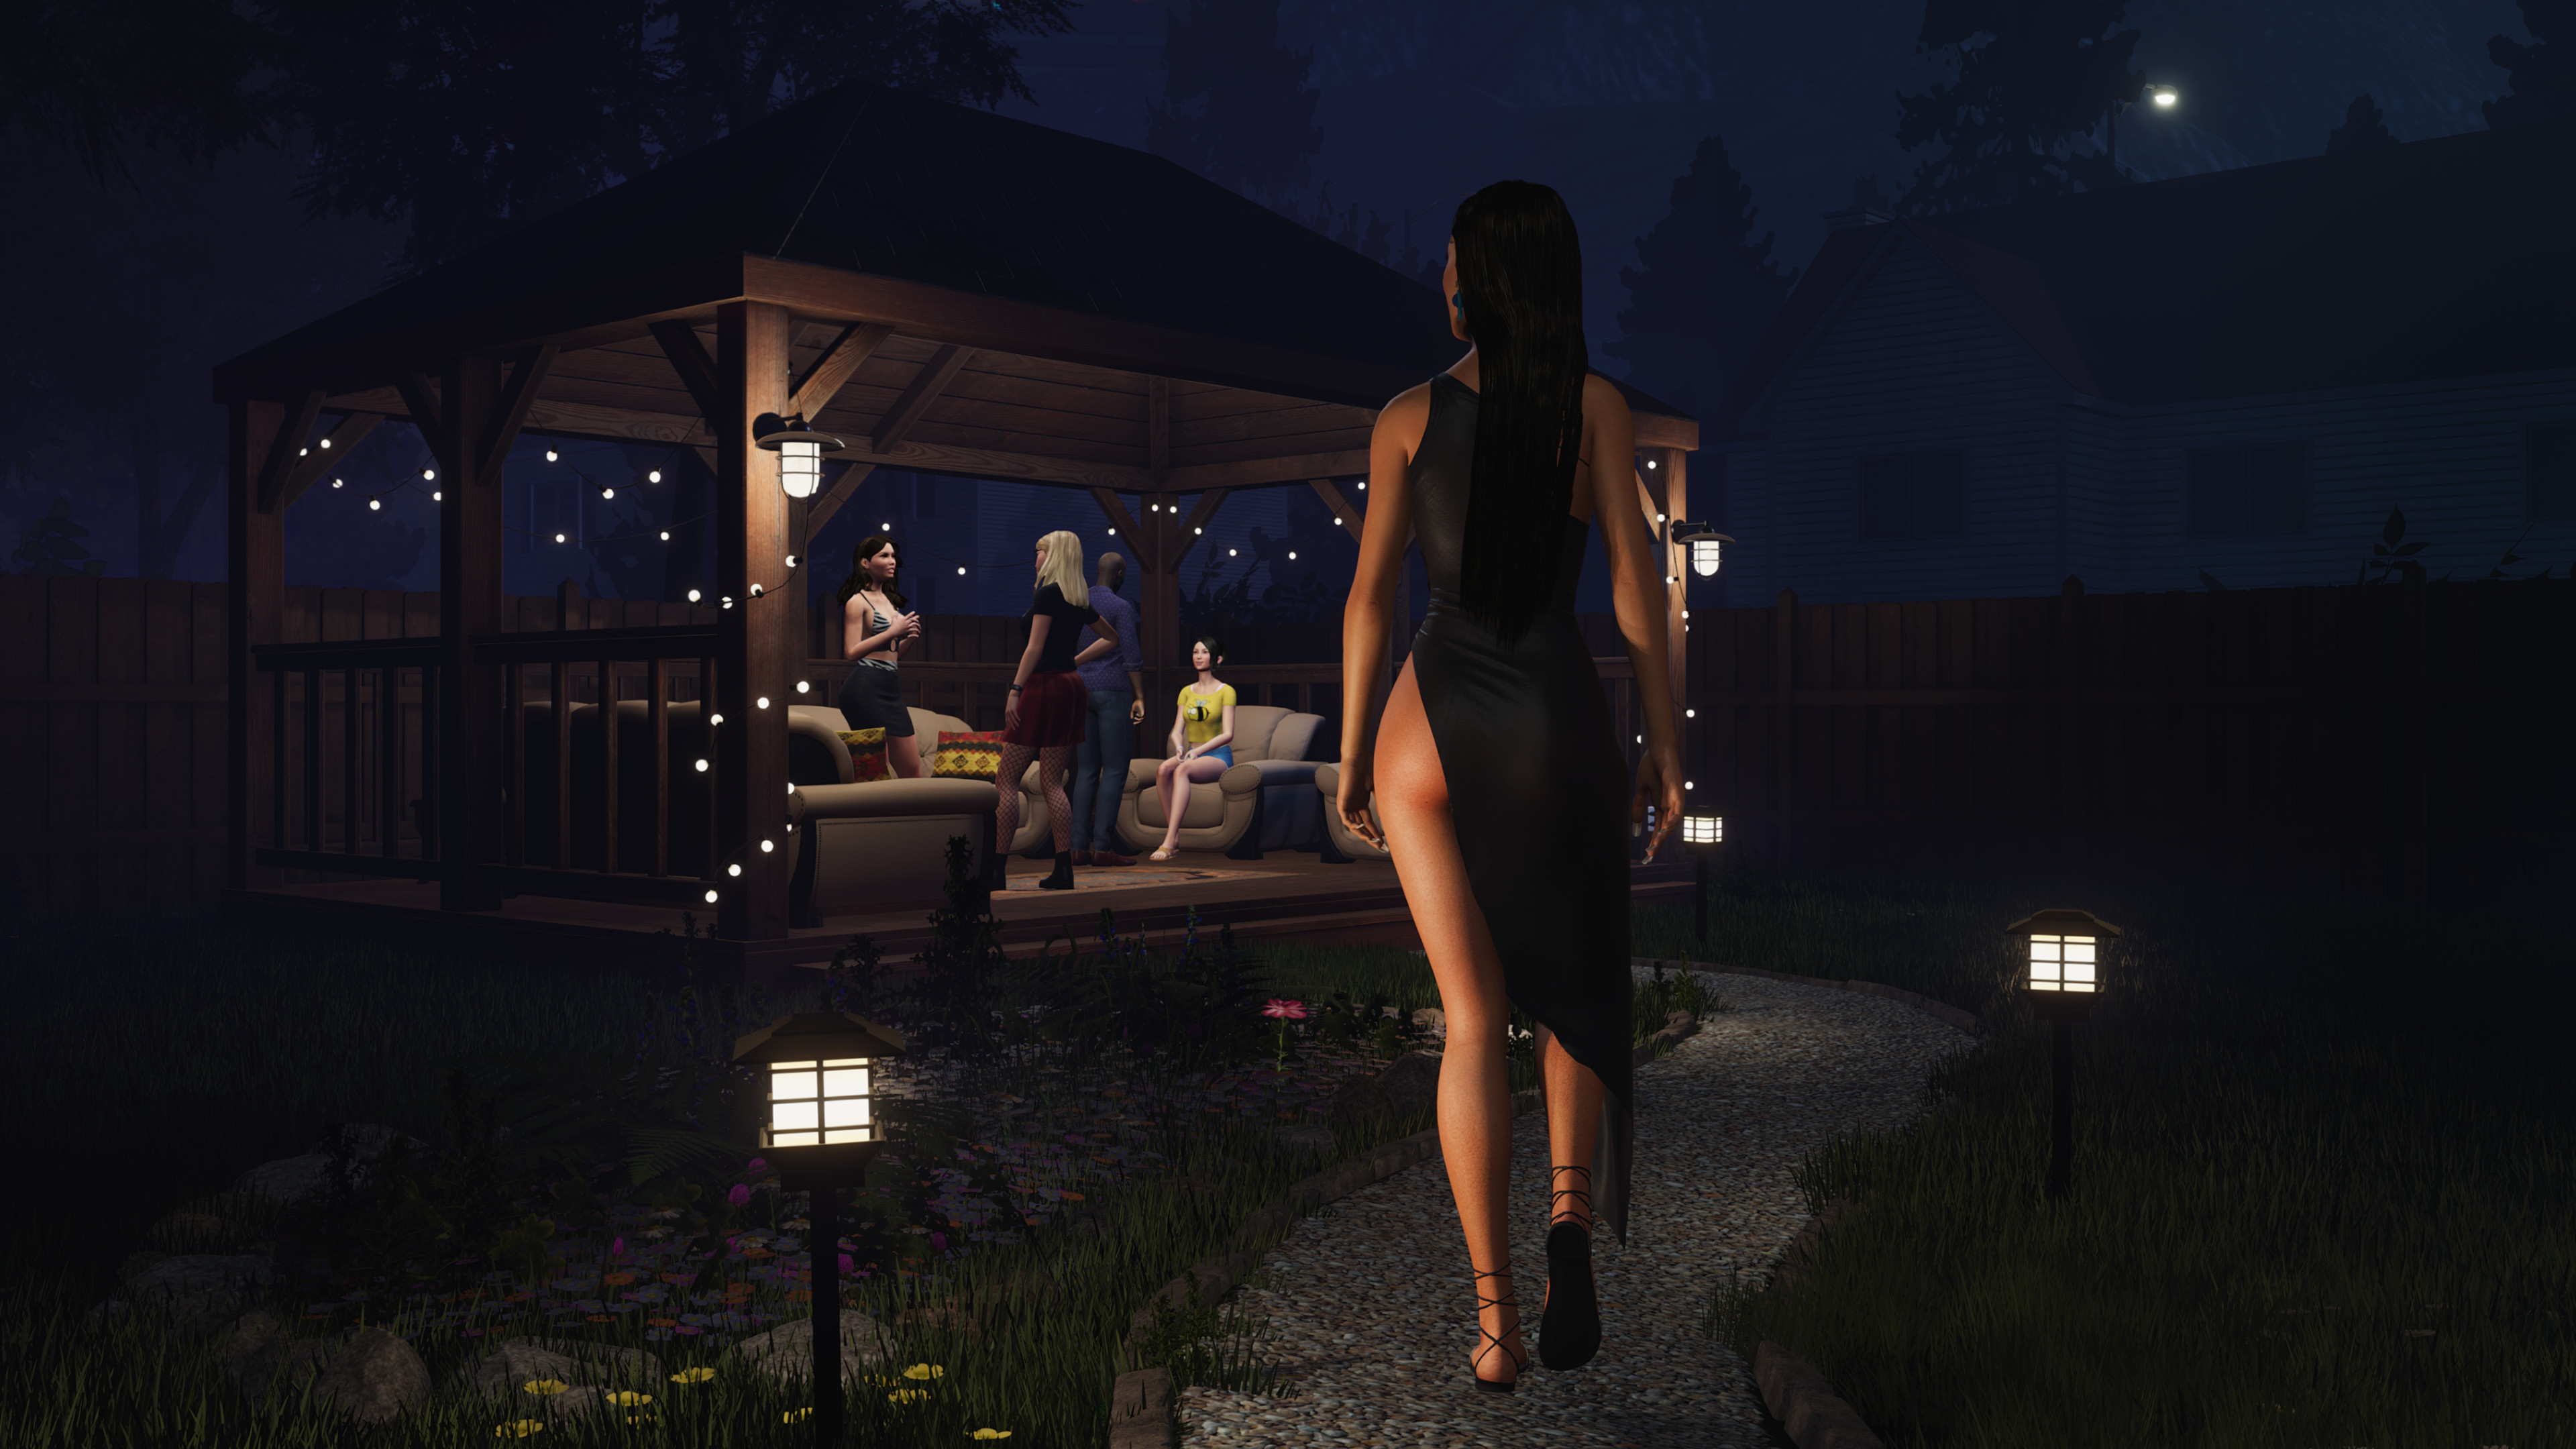 House Party - Doja Cat Expansion Pack Free Download for PC